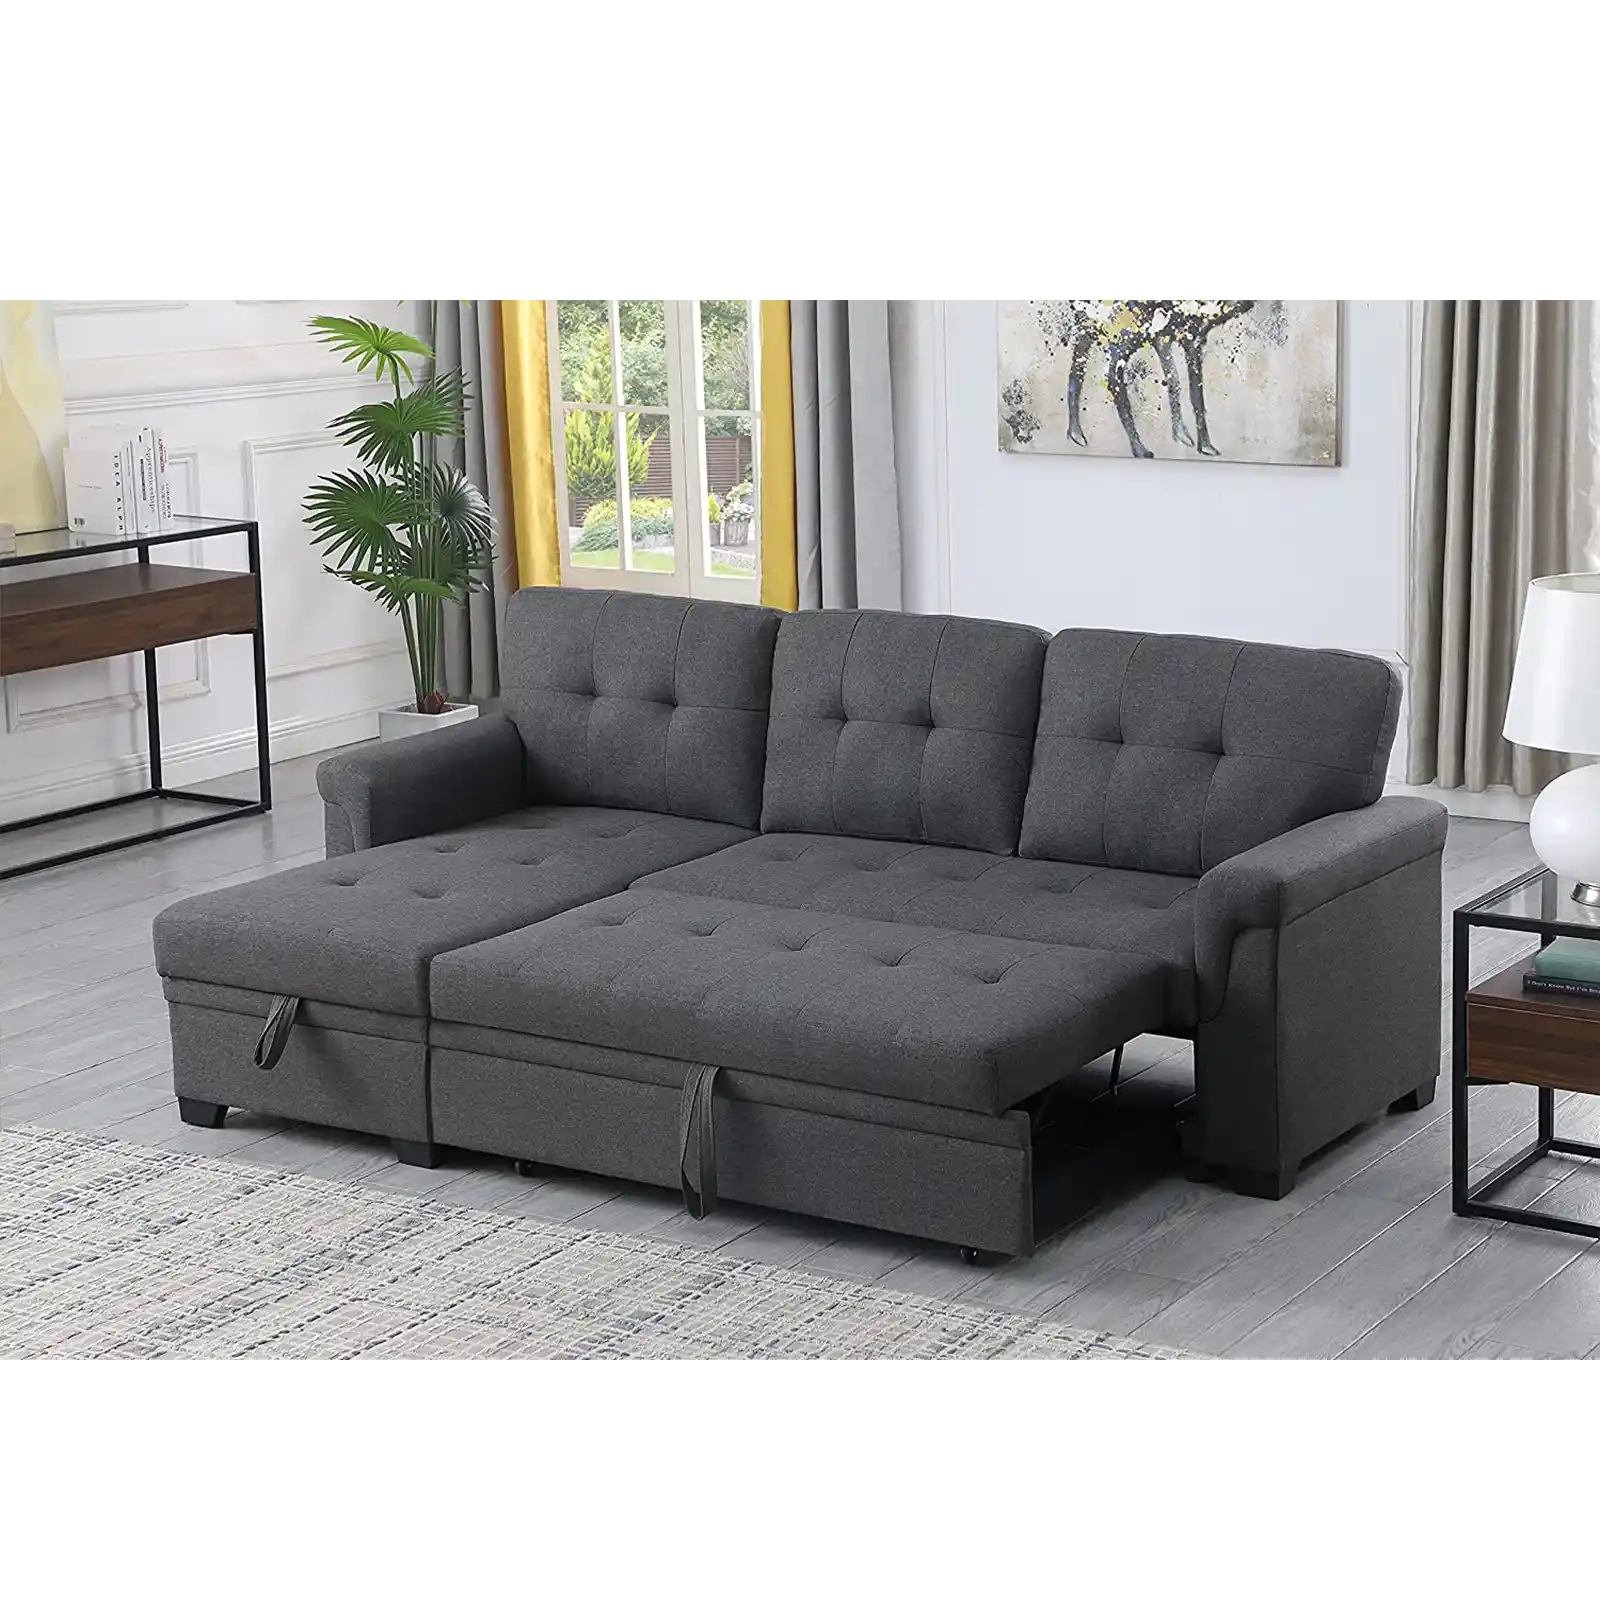 Linen Reversible Sleeper Sectional Sofa with Storage Chaise